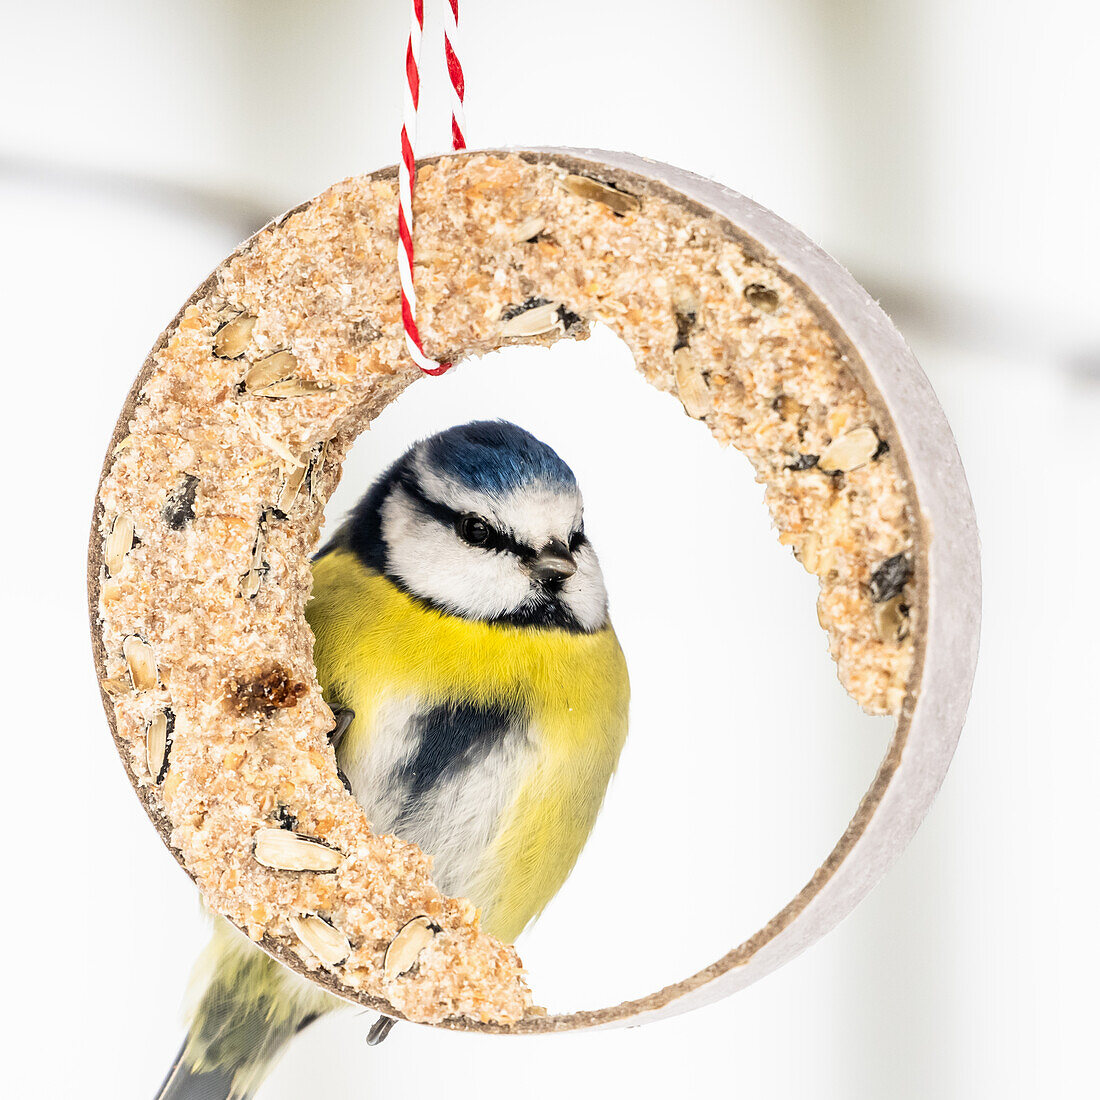 Blue tit at the feeder